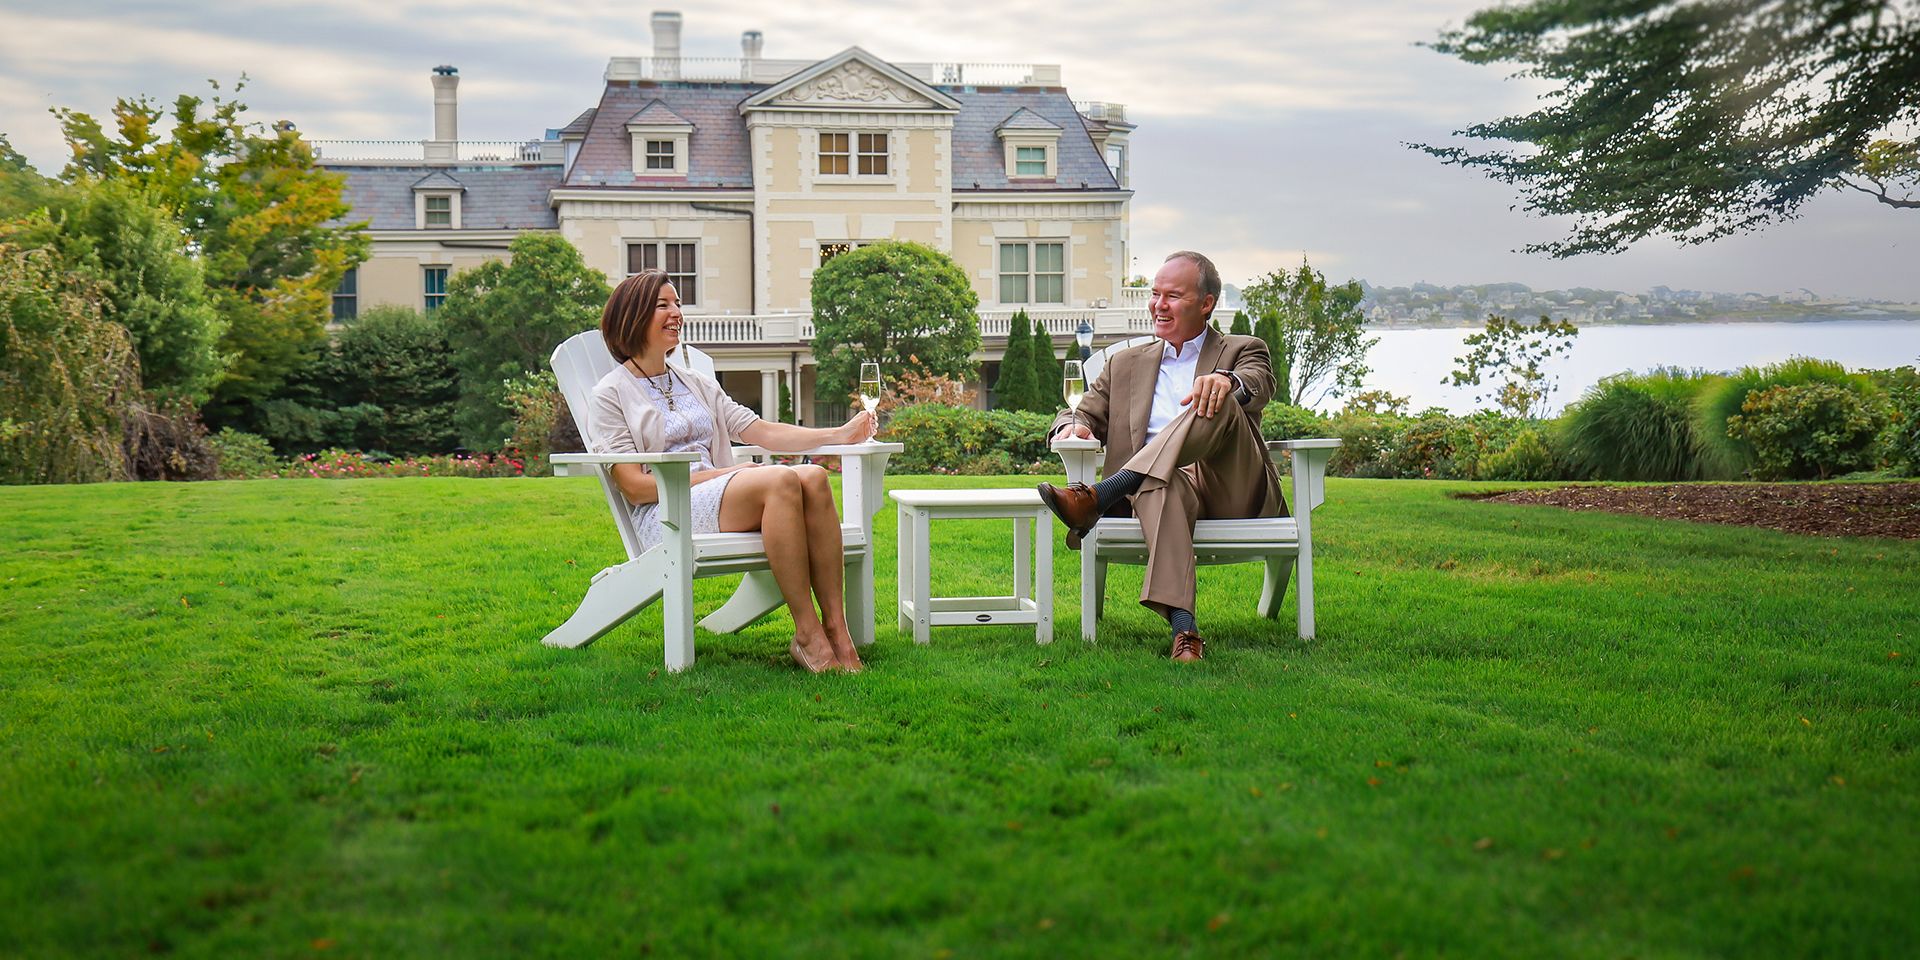 90-minutes with a private photographer at The Chanler or at a local location of your choice.